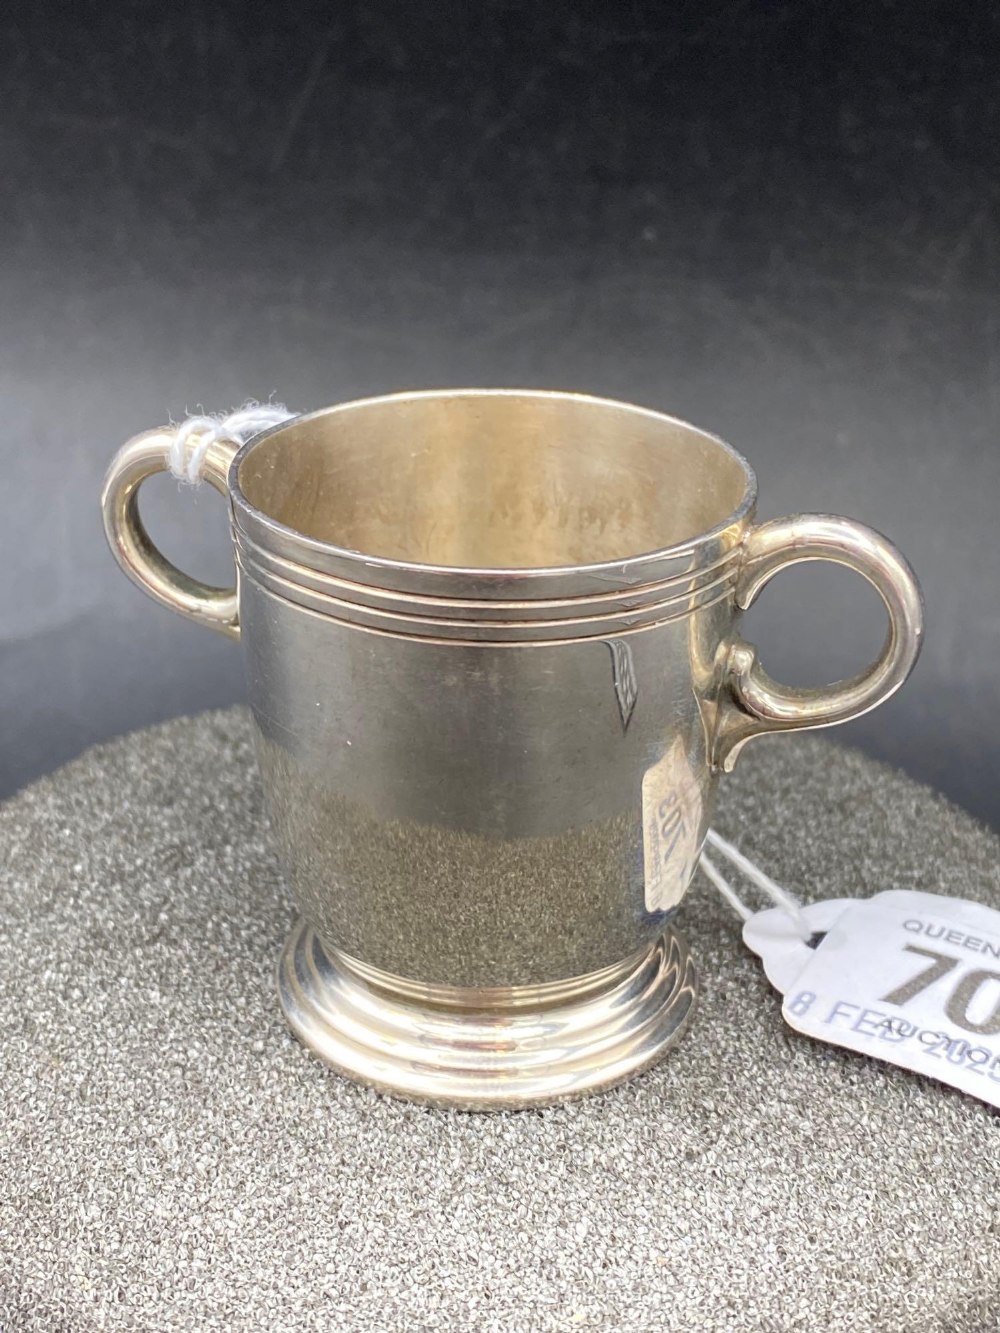 SILVER 2 HANDLED URN OF SMALL SIZE, POSSIBLY A MEASURE, LONDON 1942 BY W&W,